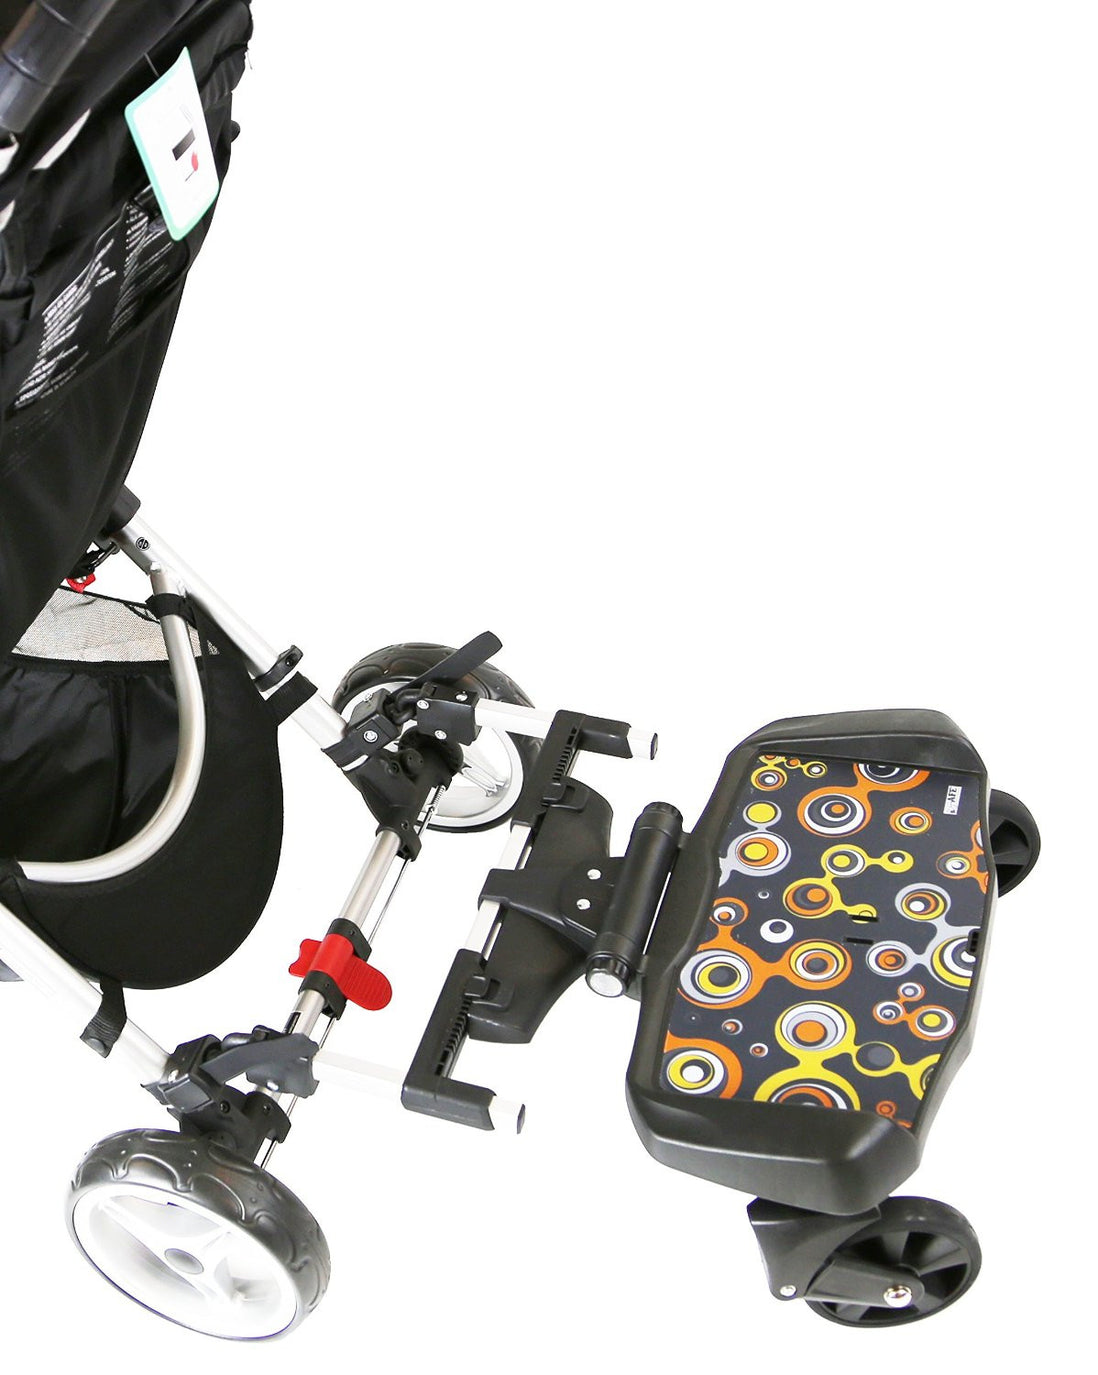 stroller and buggy board